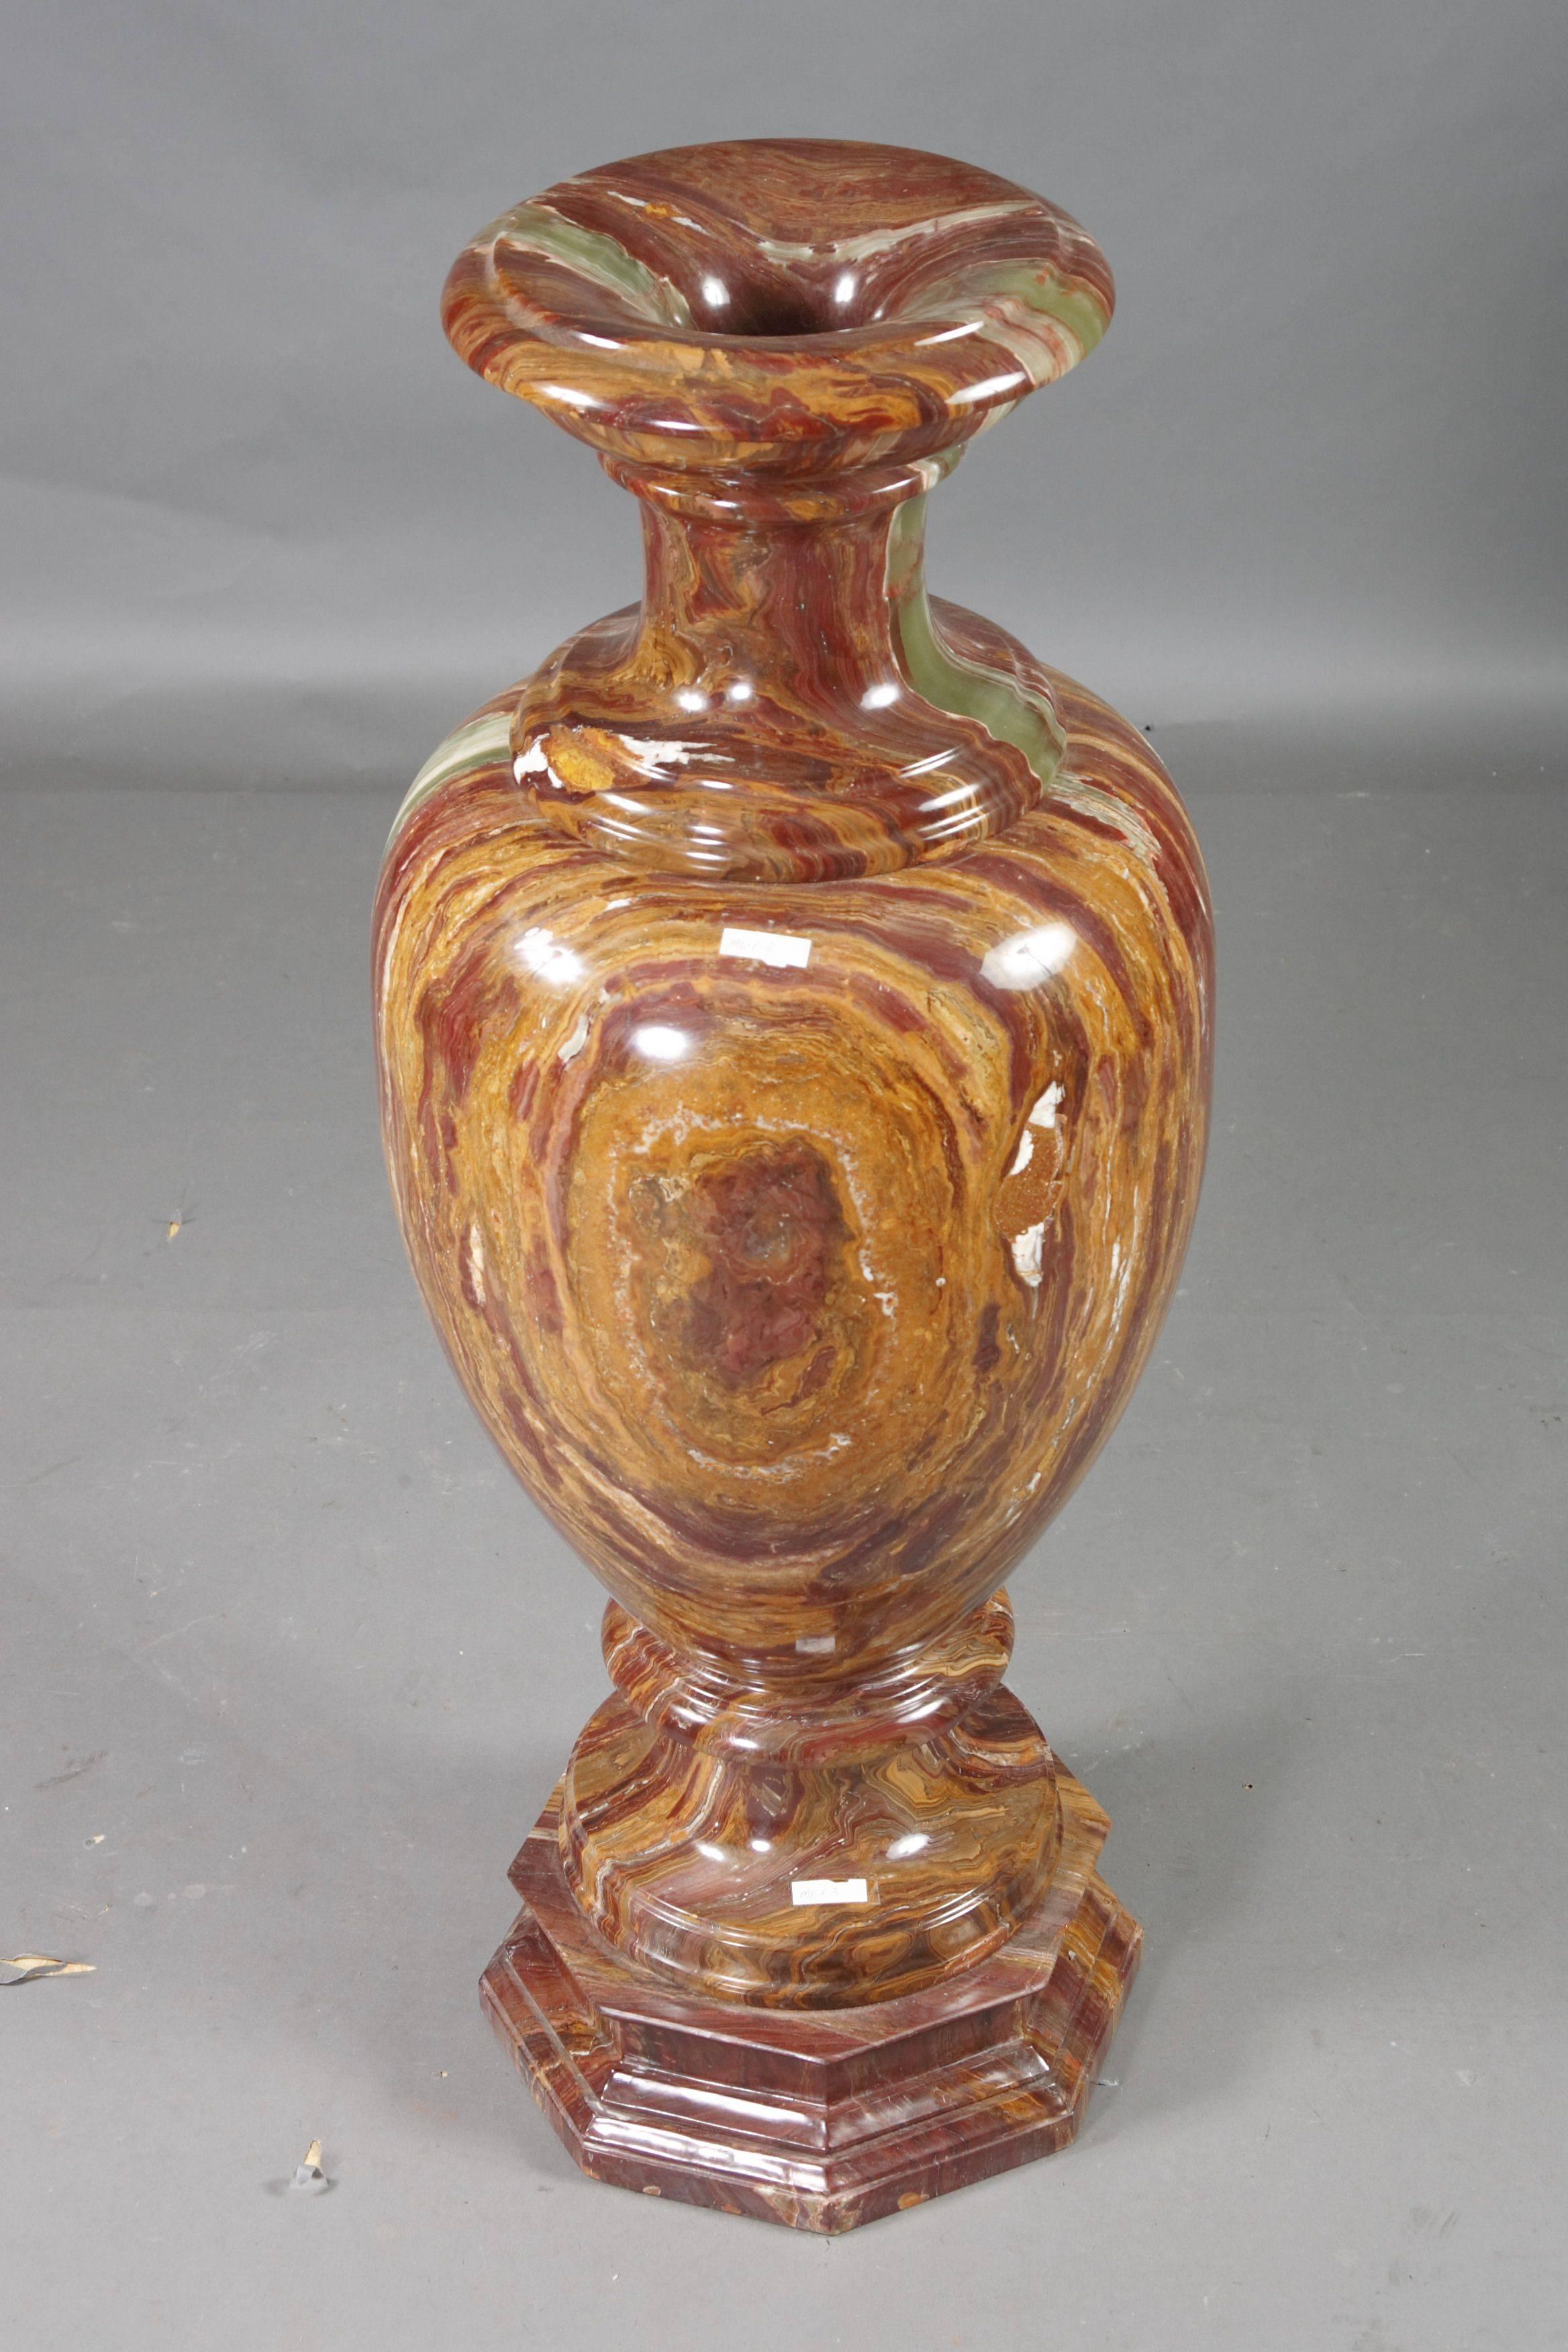 Monumental marble crater vase in classicist style.
Natural marble in red onyx. Round foot on octagonal formed plinth on sweeping shaft. Ovoid body, lightly conical, ascending neck and wide protruding, convex and profiled edge. The whole crater vase